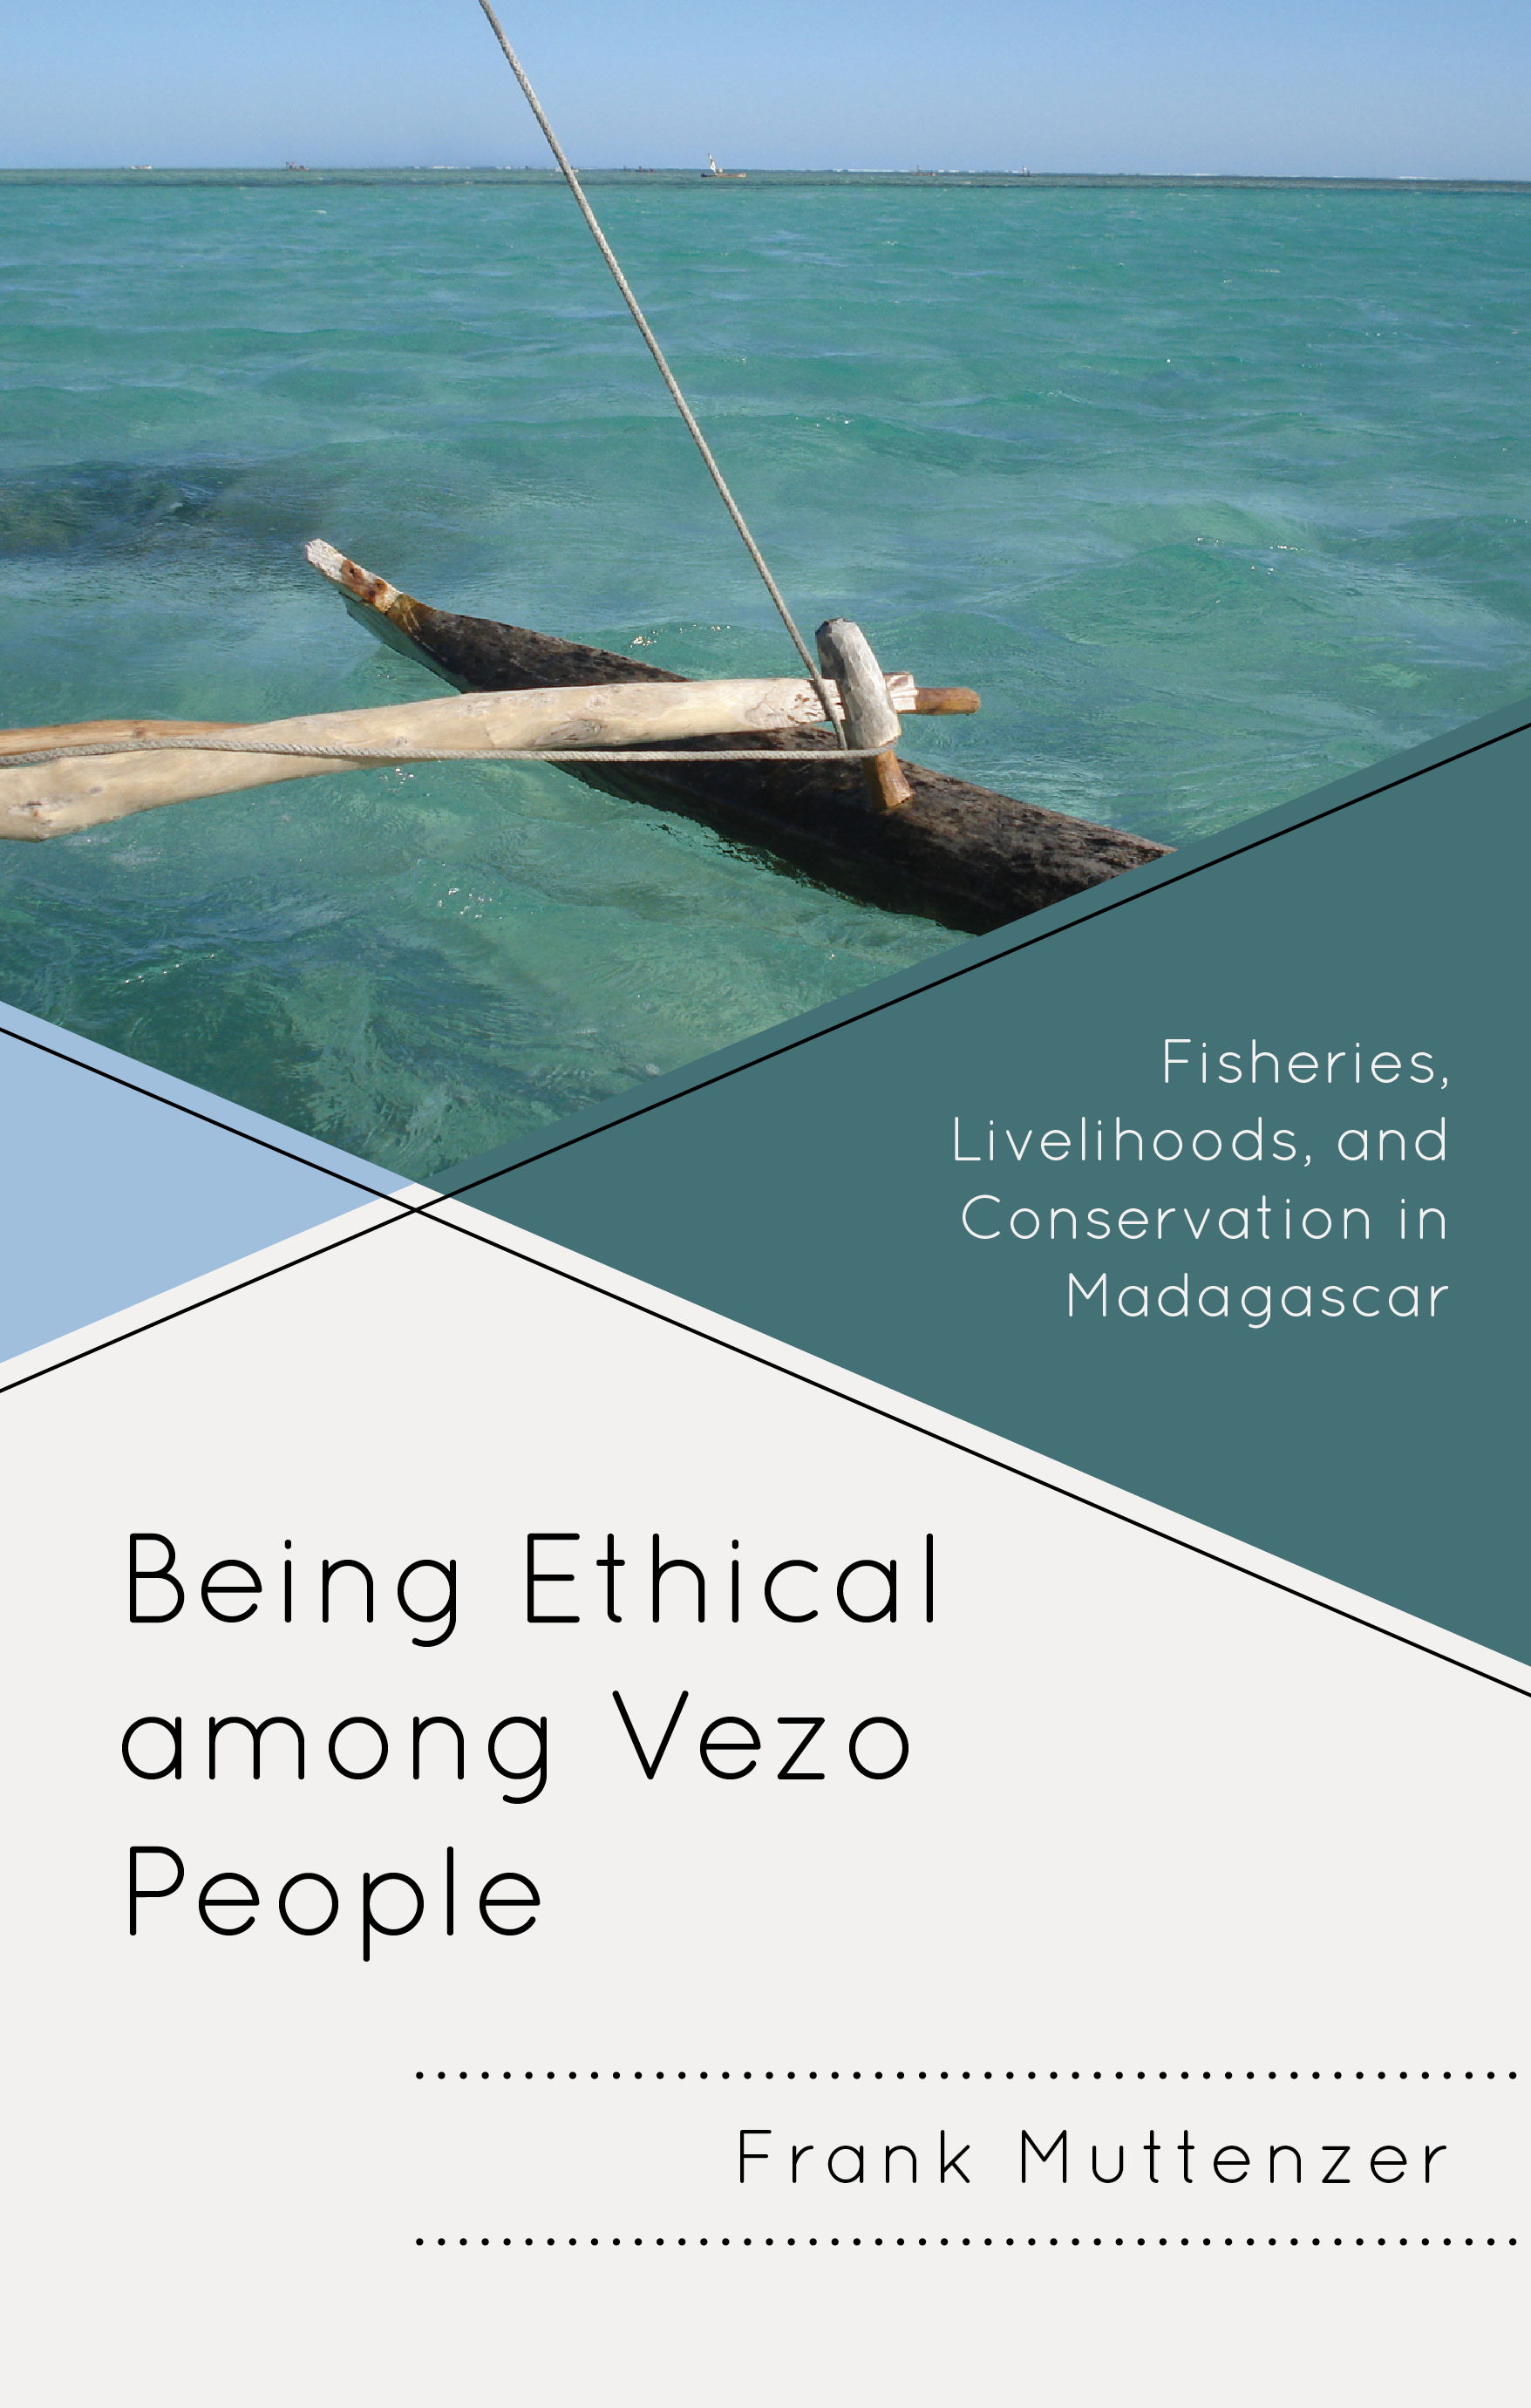 Being Ethical among Vezo People: Fisheries, Livelihoods, and Conservation in Madagascar